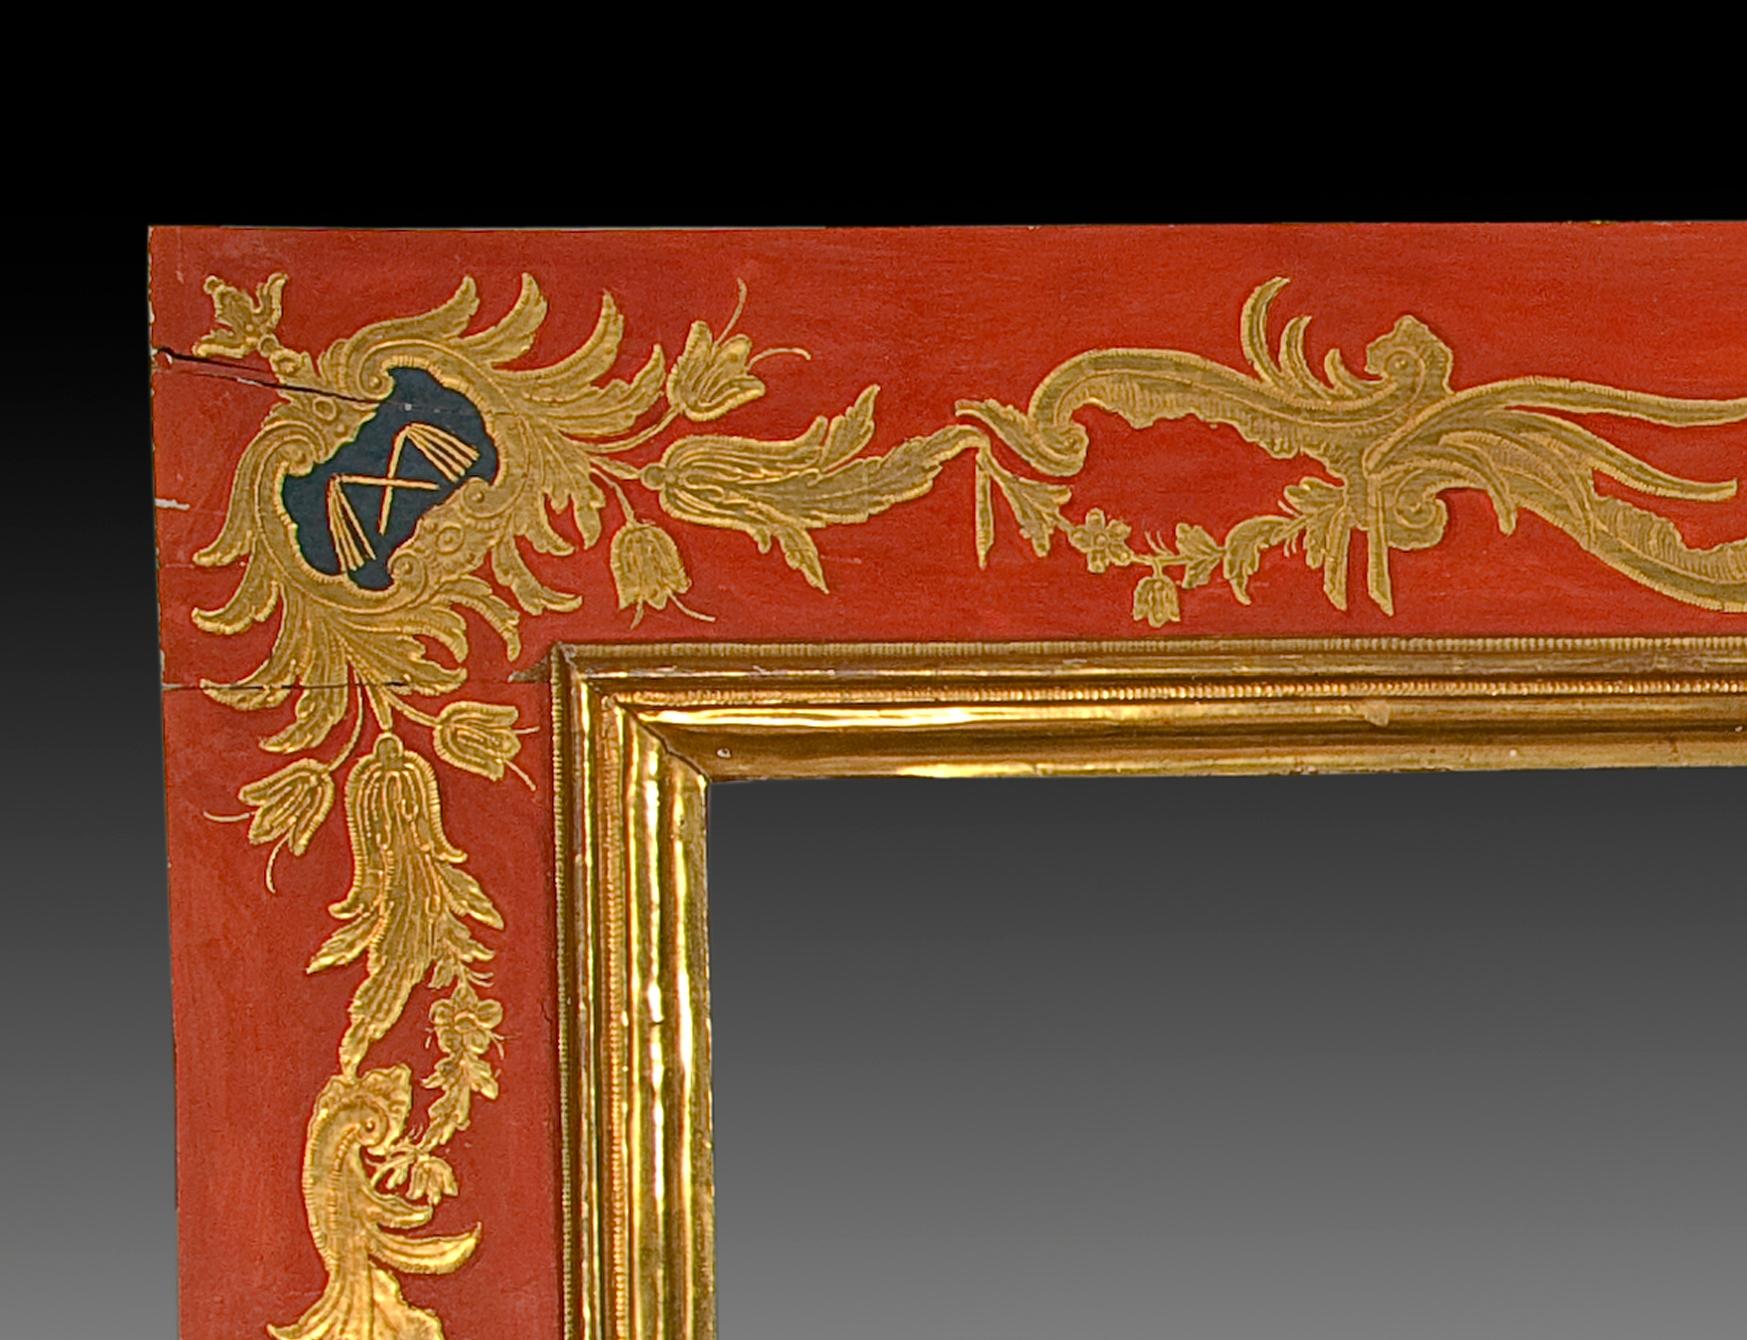 Polychrome and gilded wood frame. Late 18th century.
Rectangular frame with golden seed beads on a red background and elements related to the Passion of Christ in shields in the corners and center of the longest sides: dice, nails, bag (of the Judas